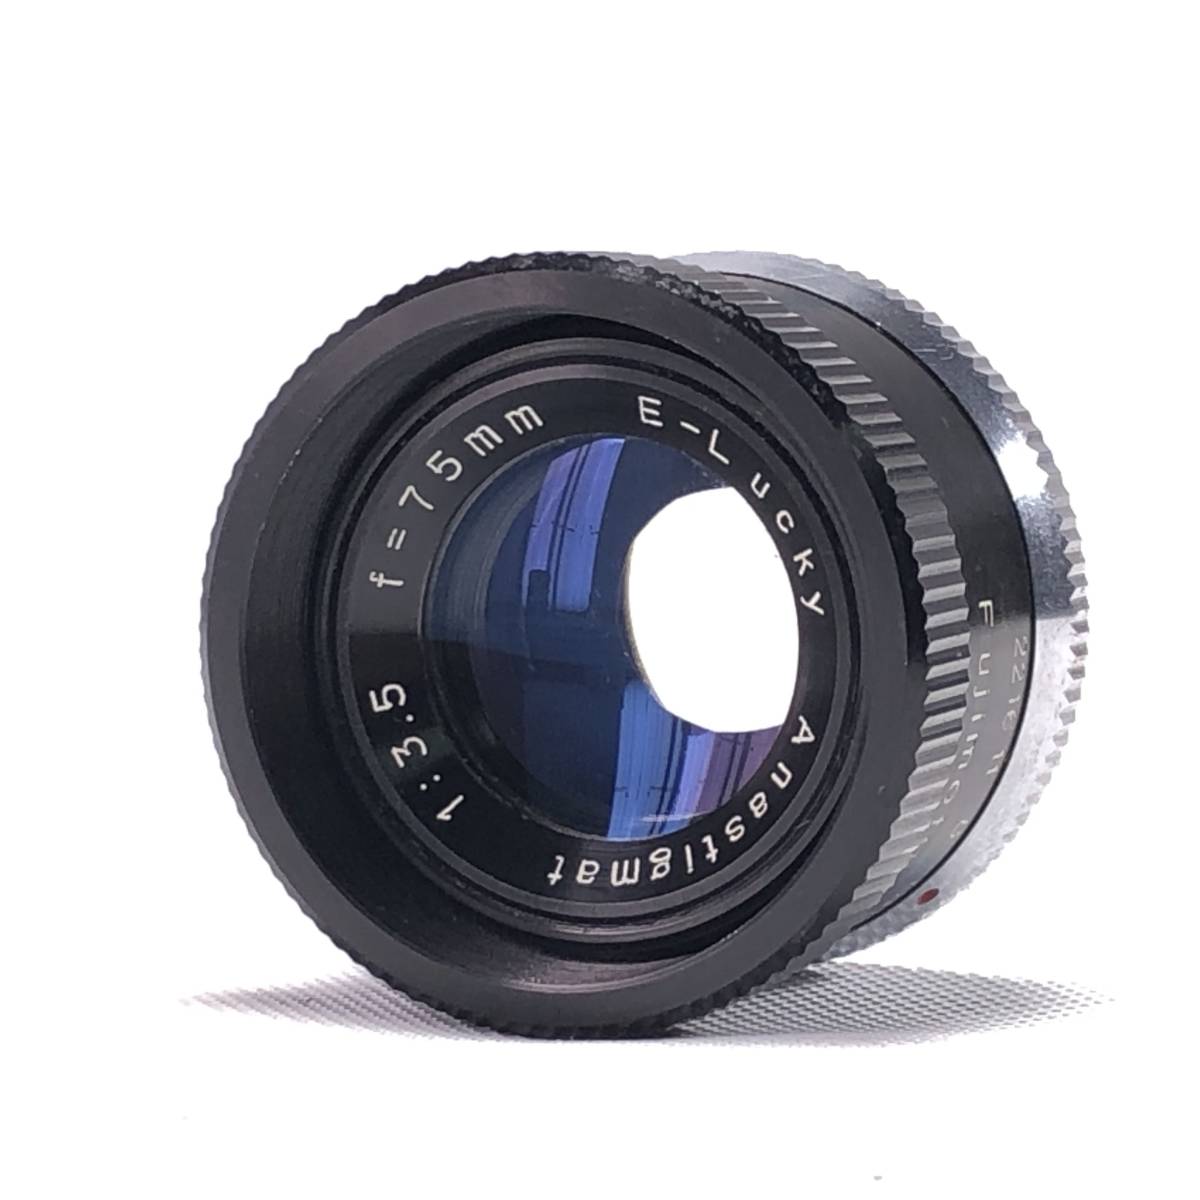 E-Lucky Anastigmat 75mm F3.5 wistaria book@ photograph industry Lucky discount ... lens staple product .OA4c